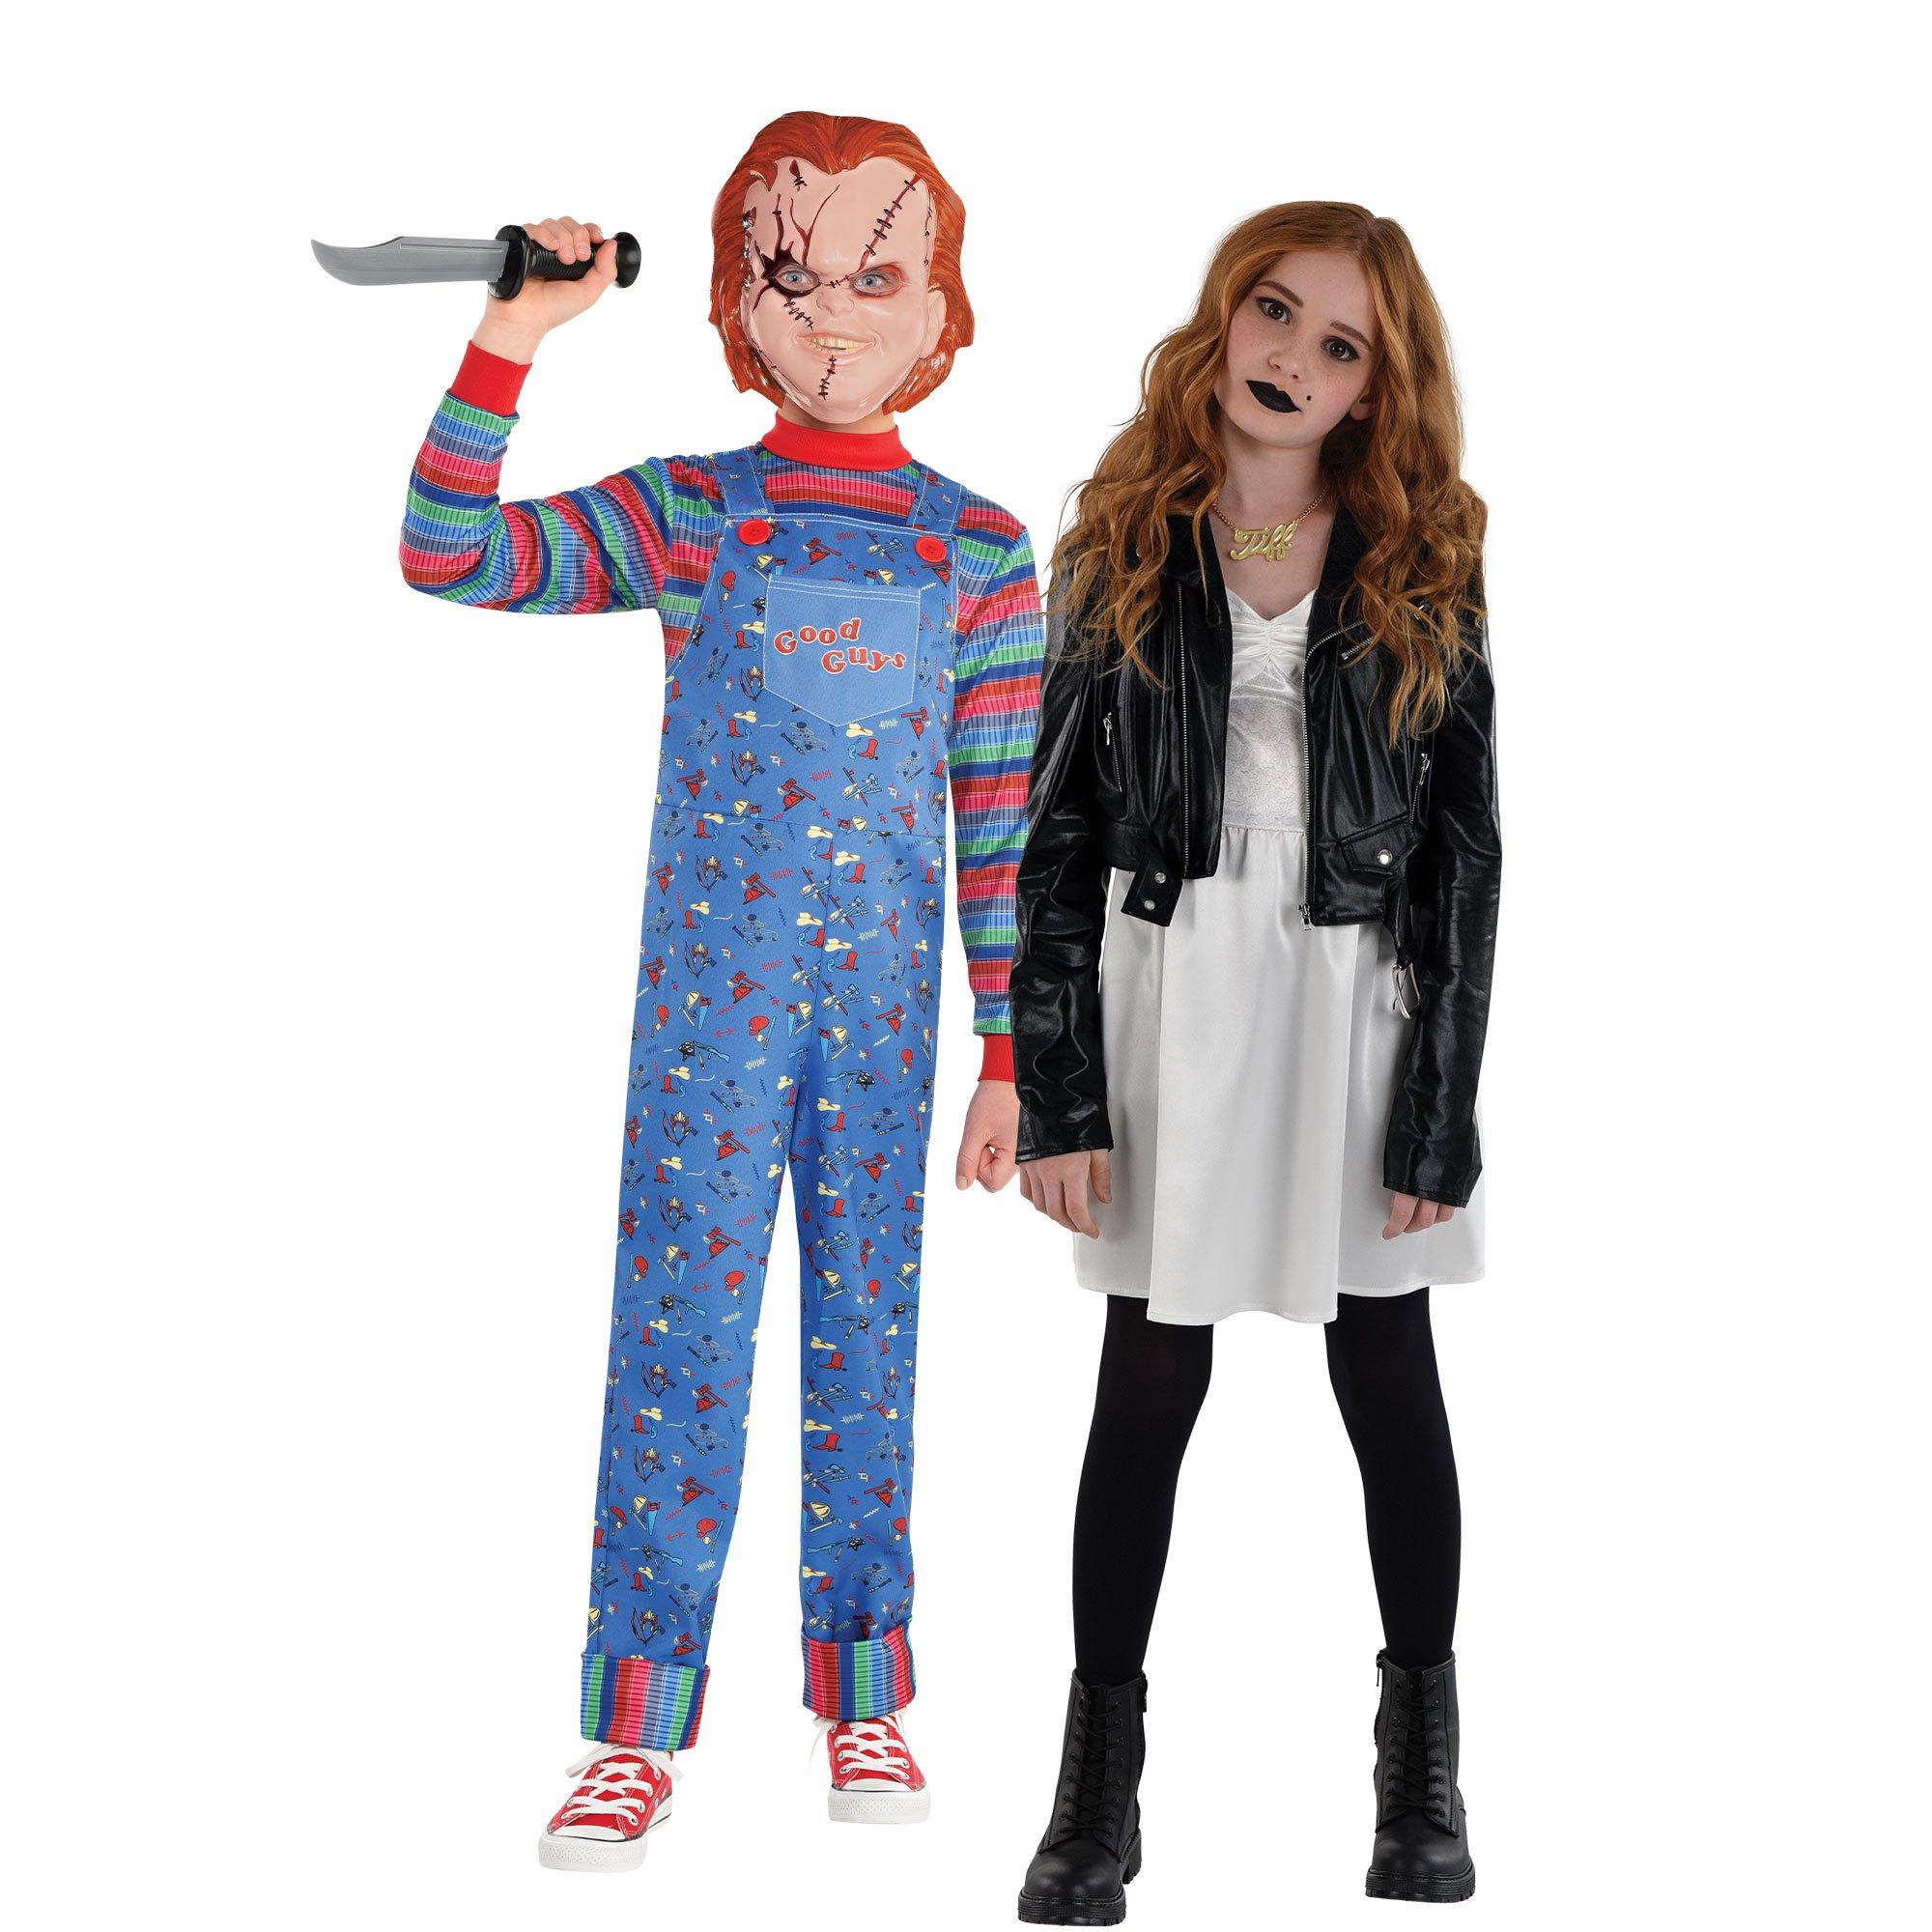 bride of chucky costume for girls